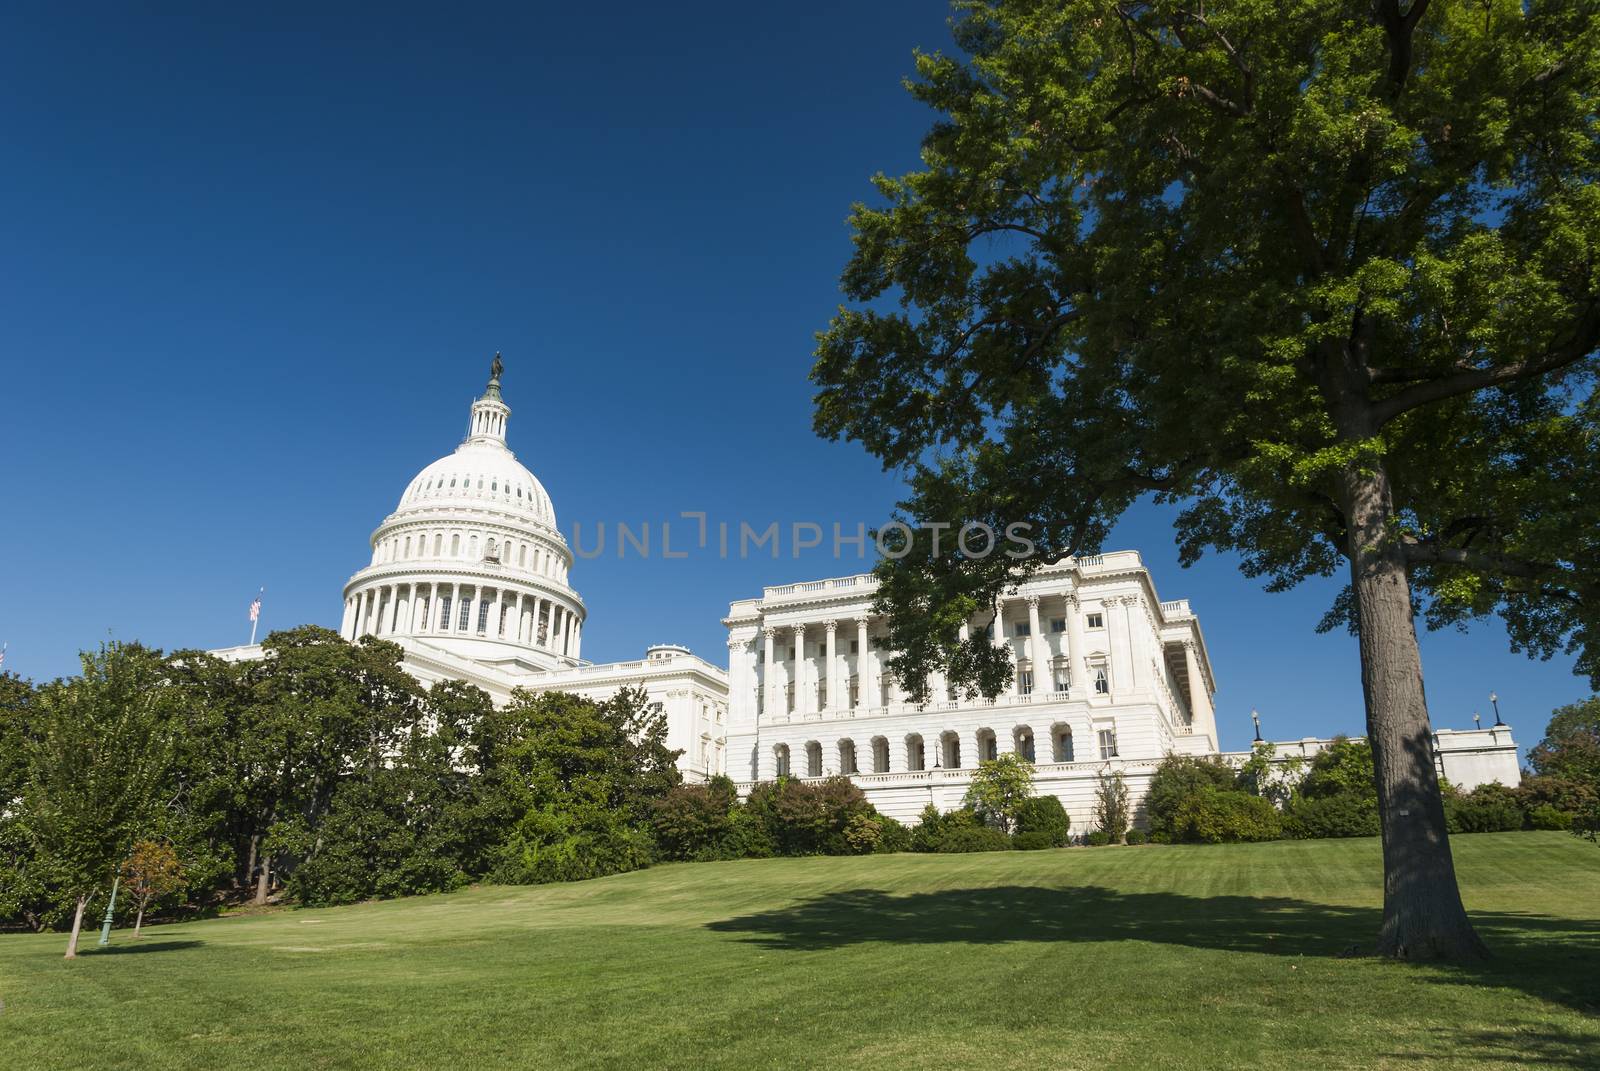 The US Capitol by hanusst